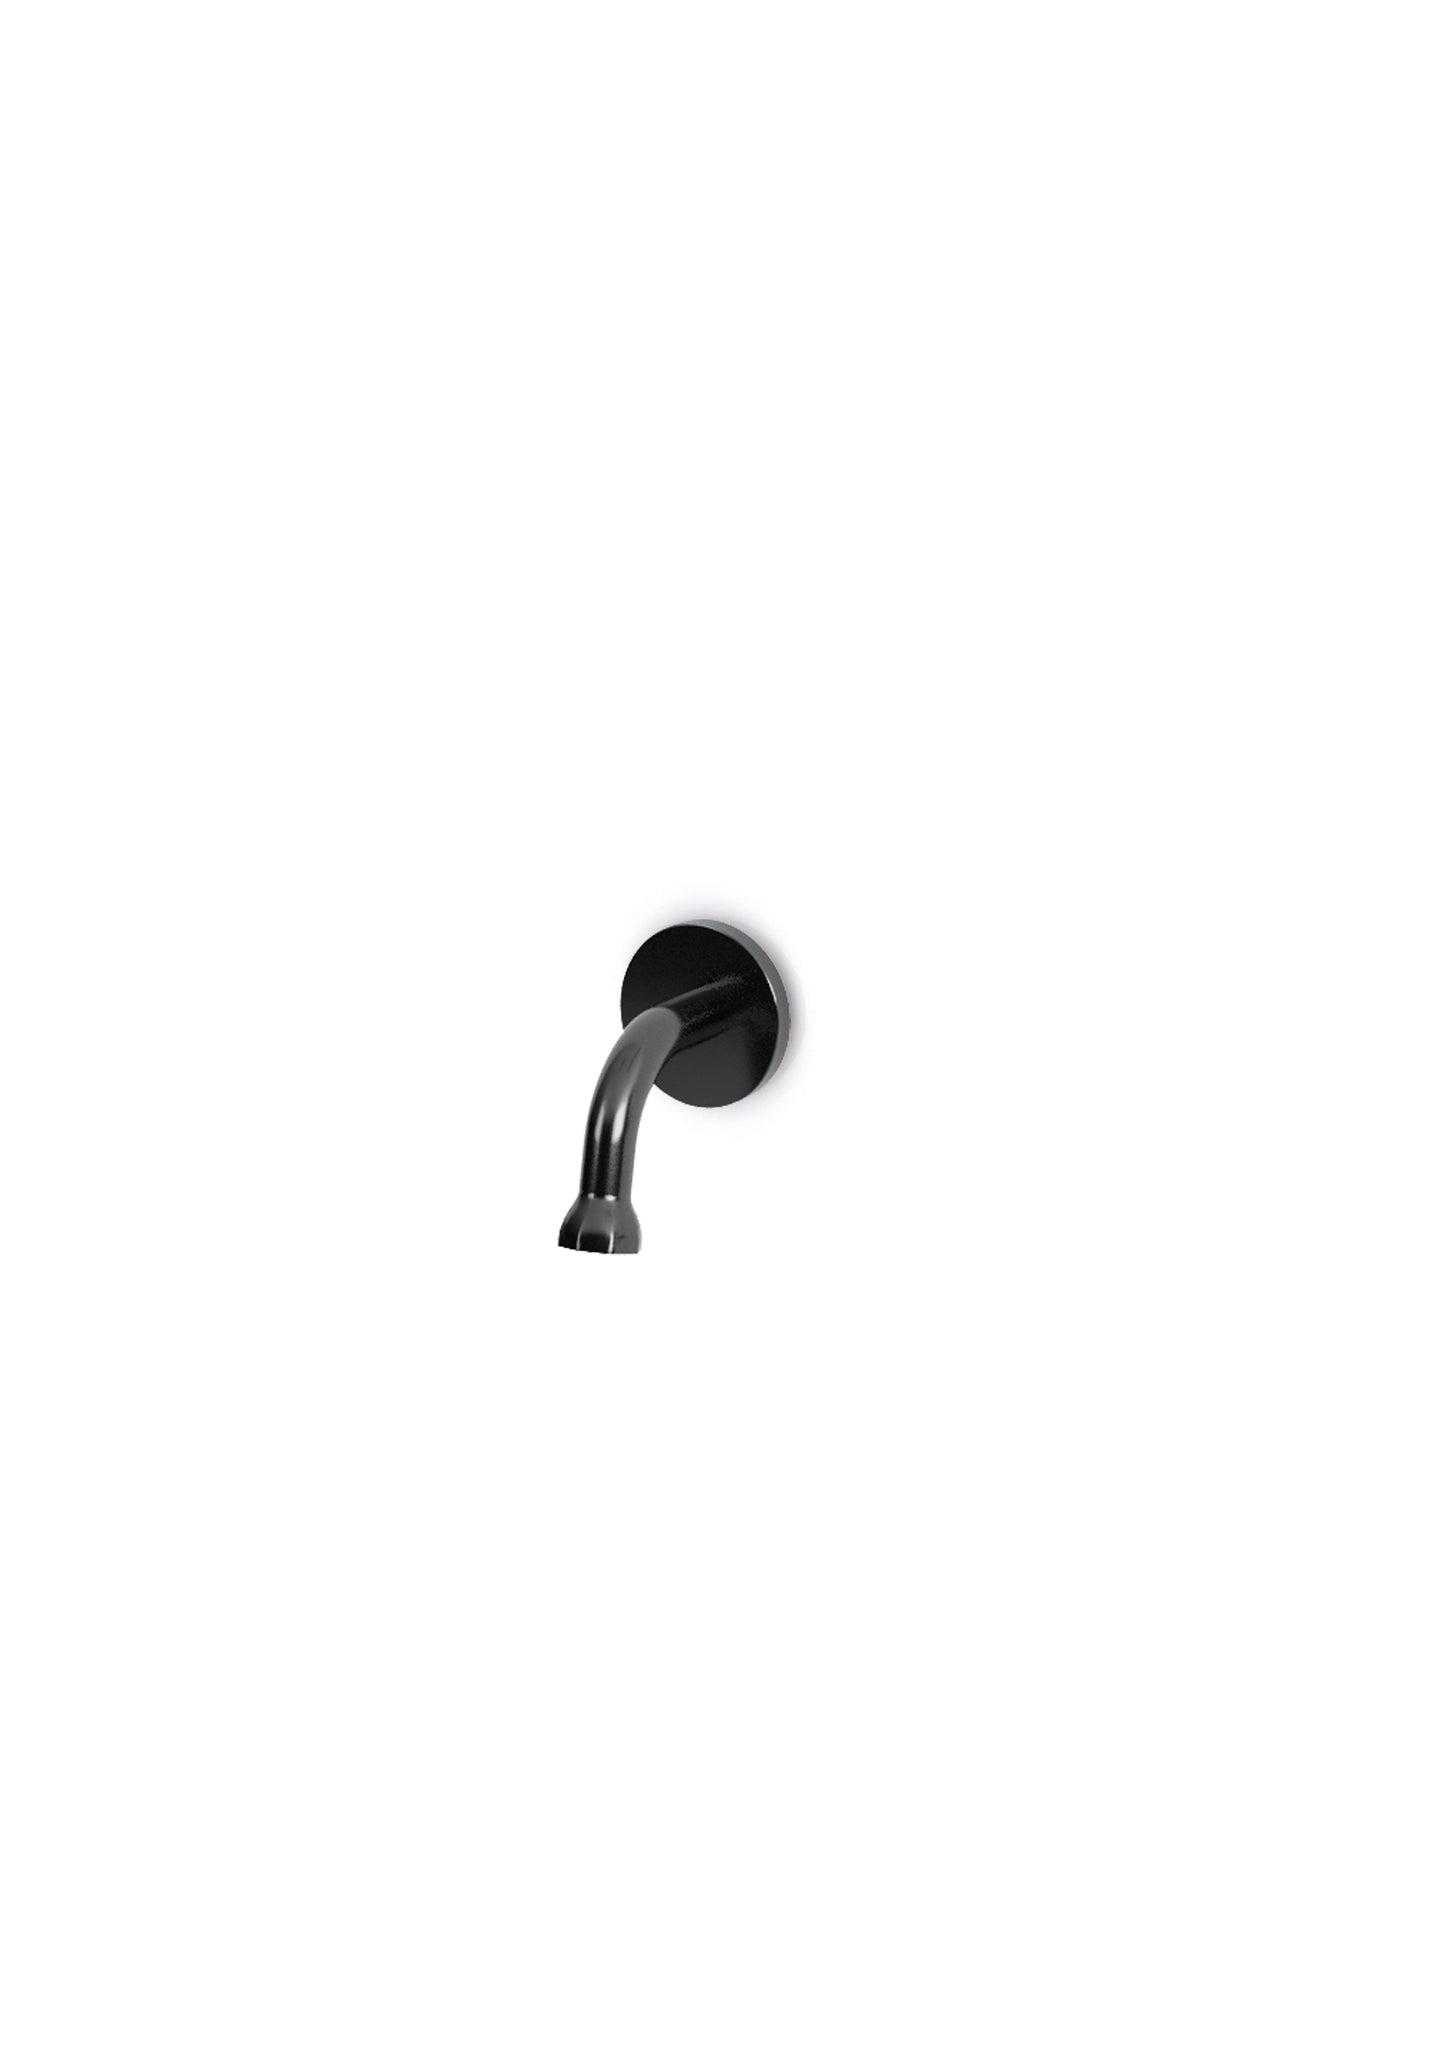 JEE-O Bloom Spout Short Wall Mounted Stainless Steel for Basin or Bath, Gun Metal